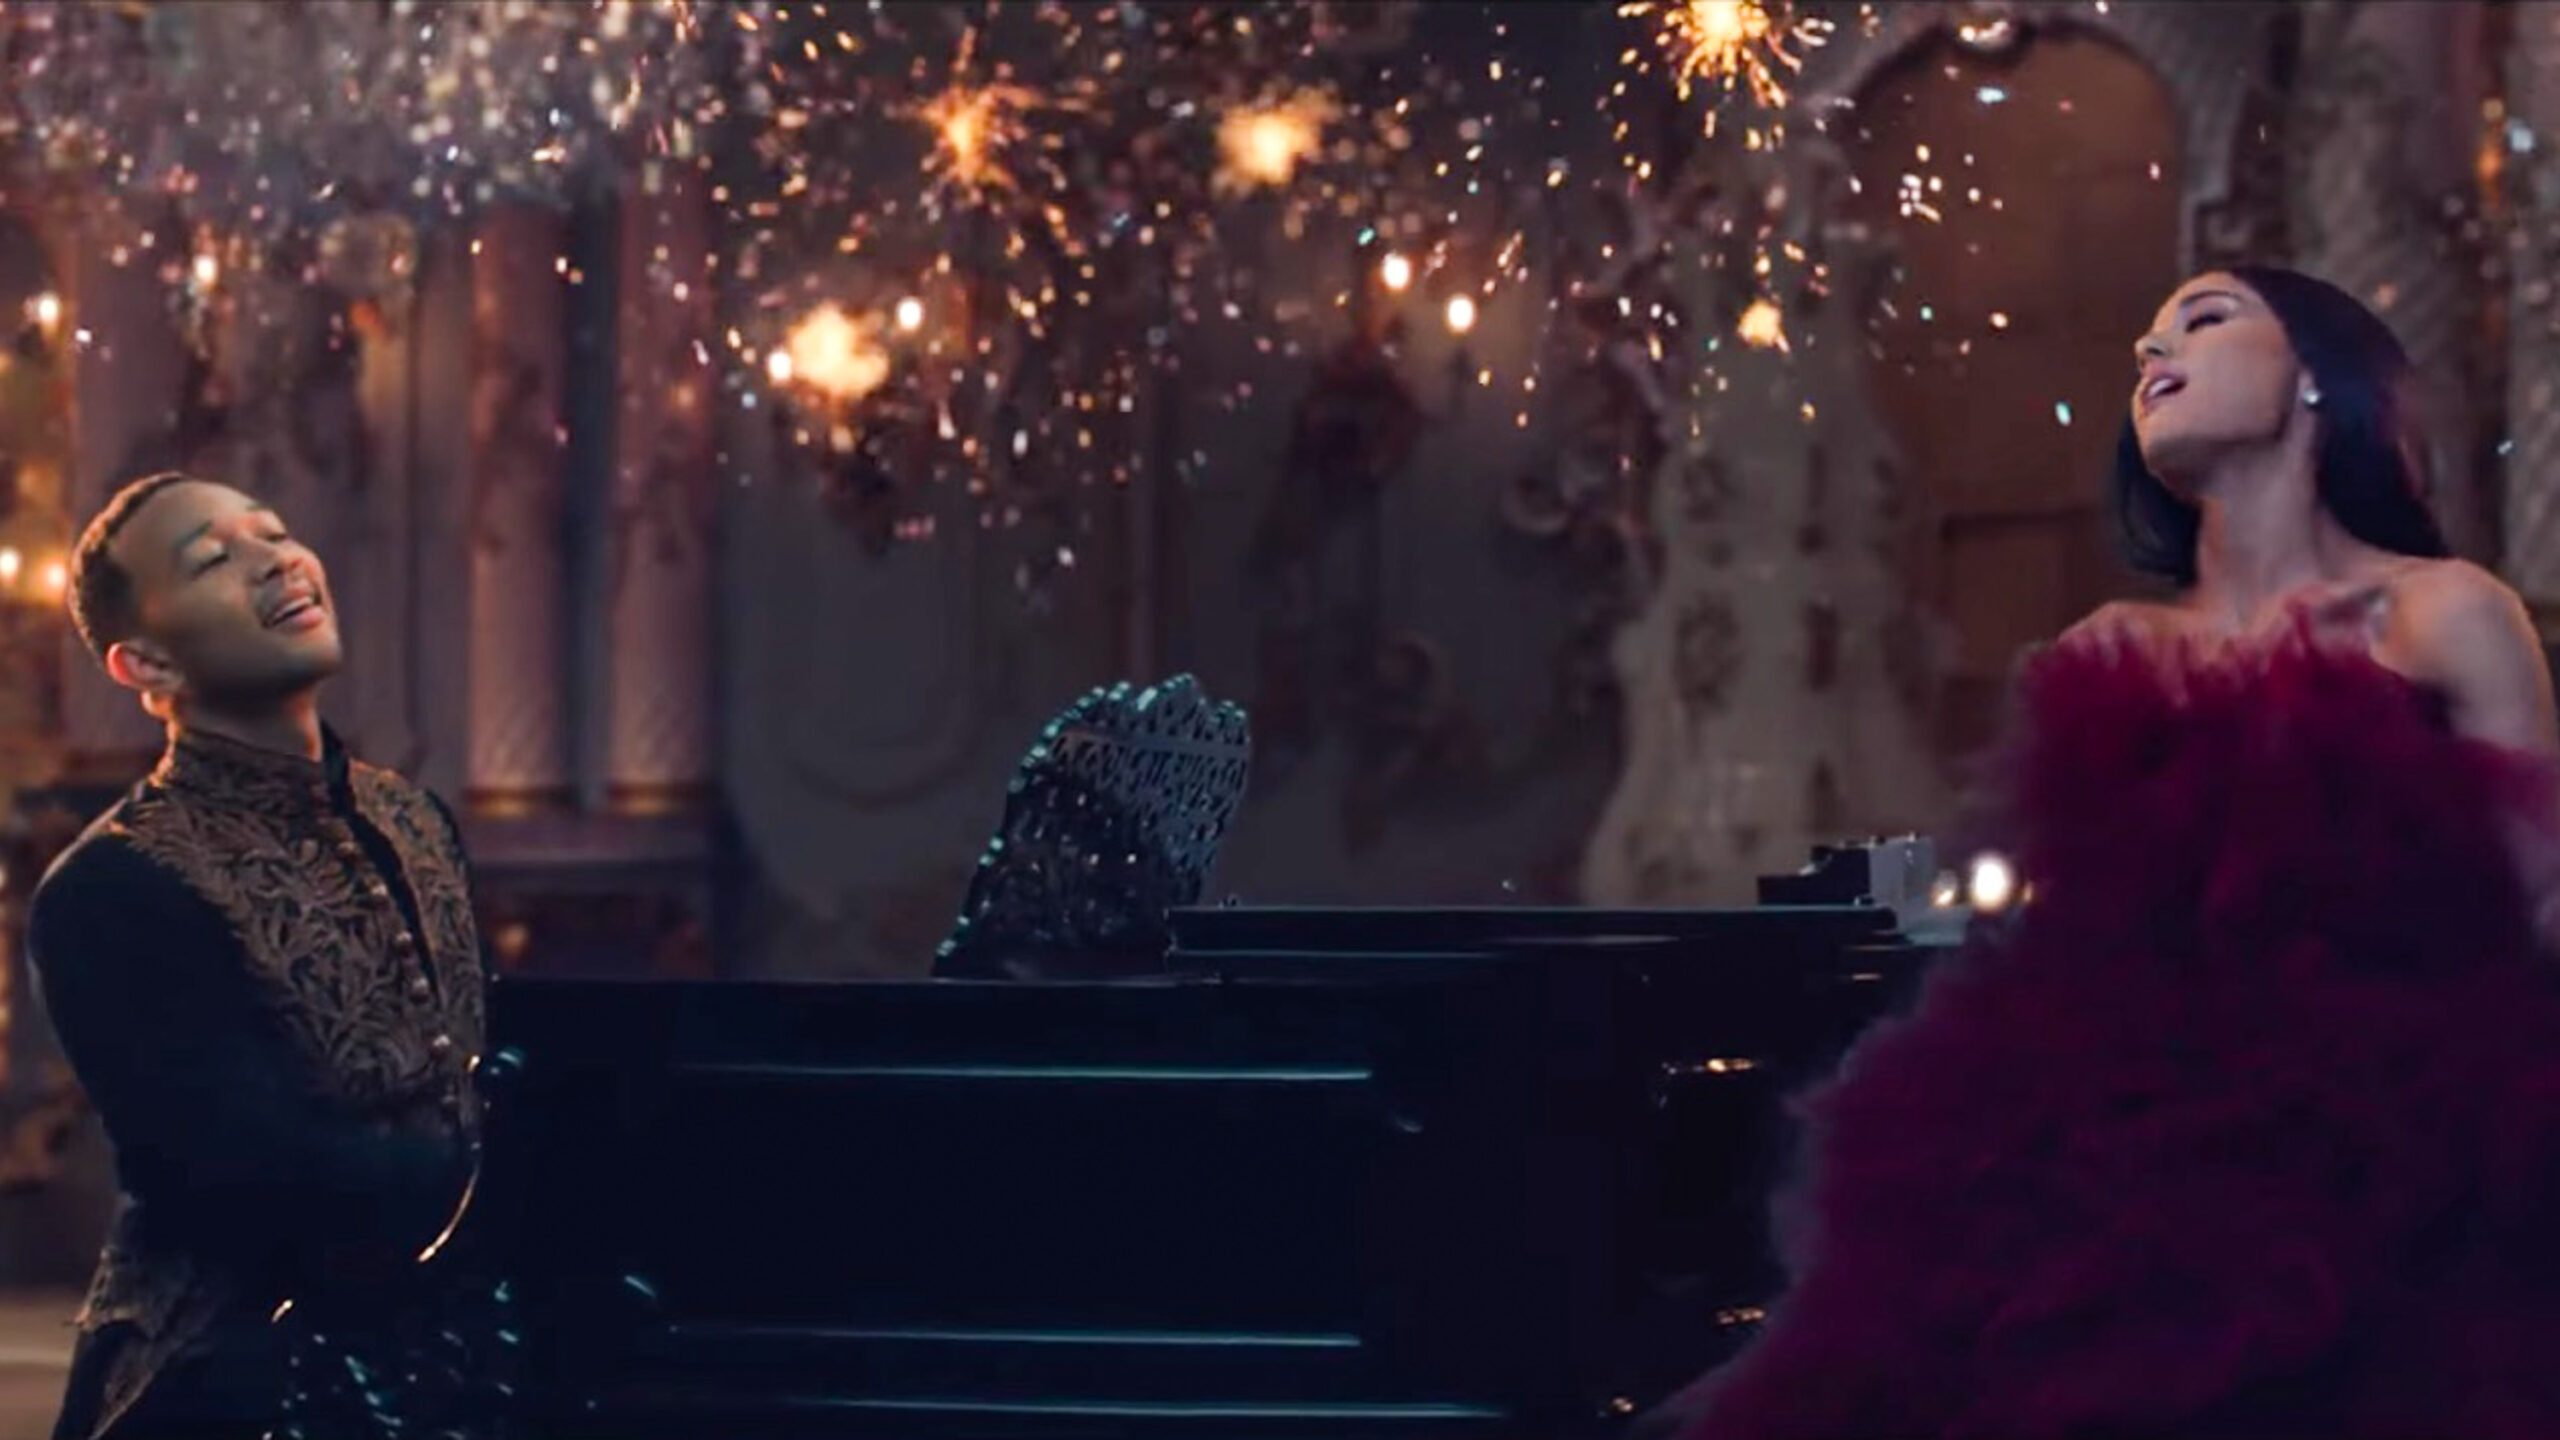 WATCH: Ariana Grande, John Legend in ‘Beauty and the Beast’ music video